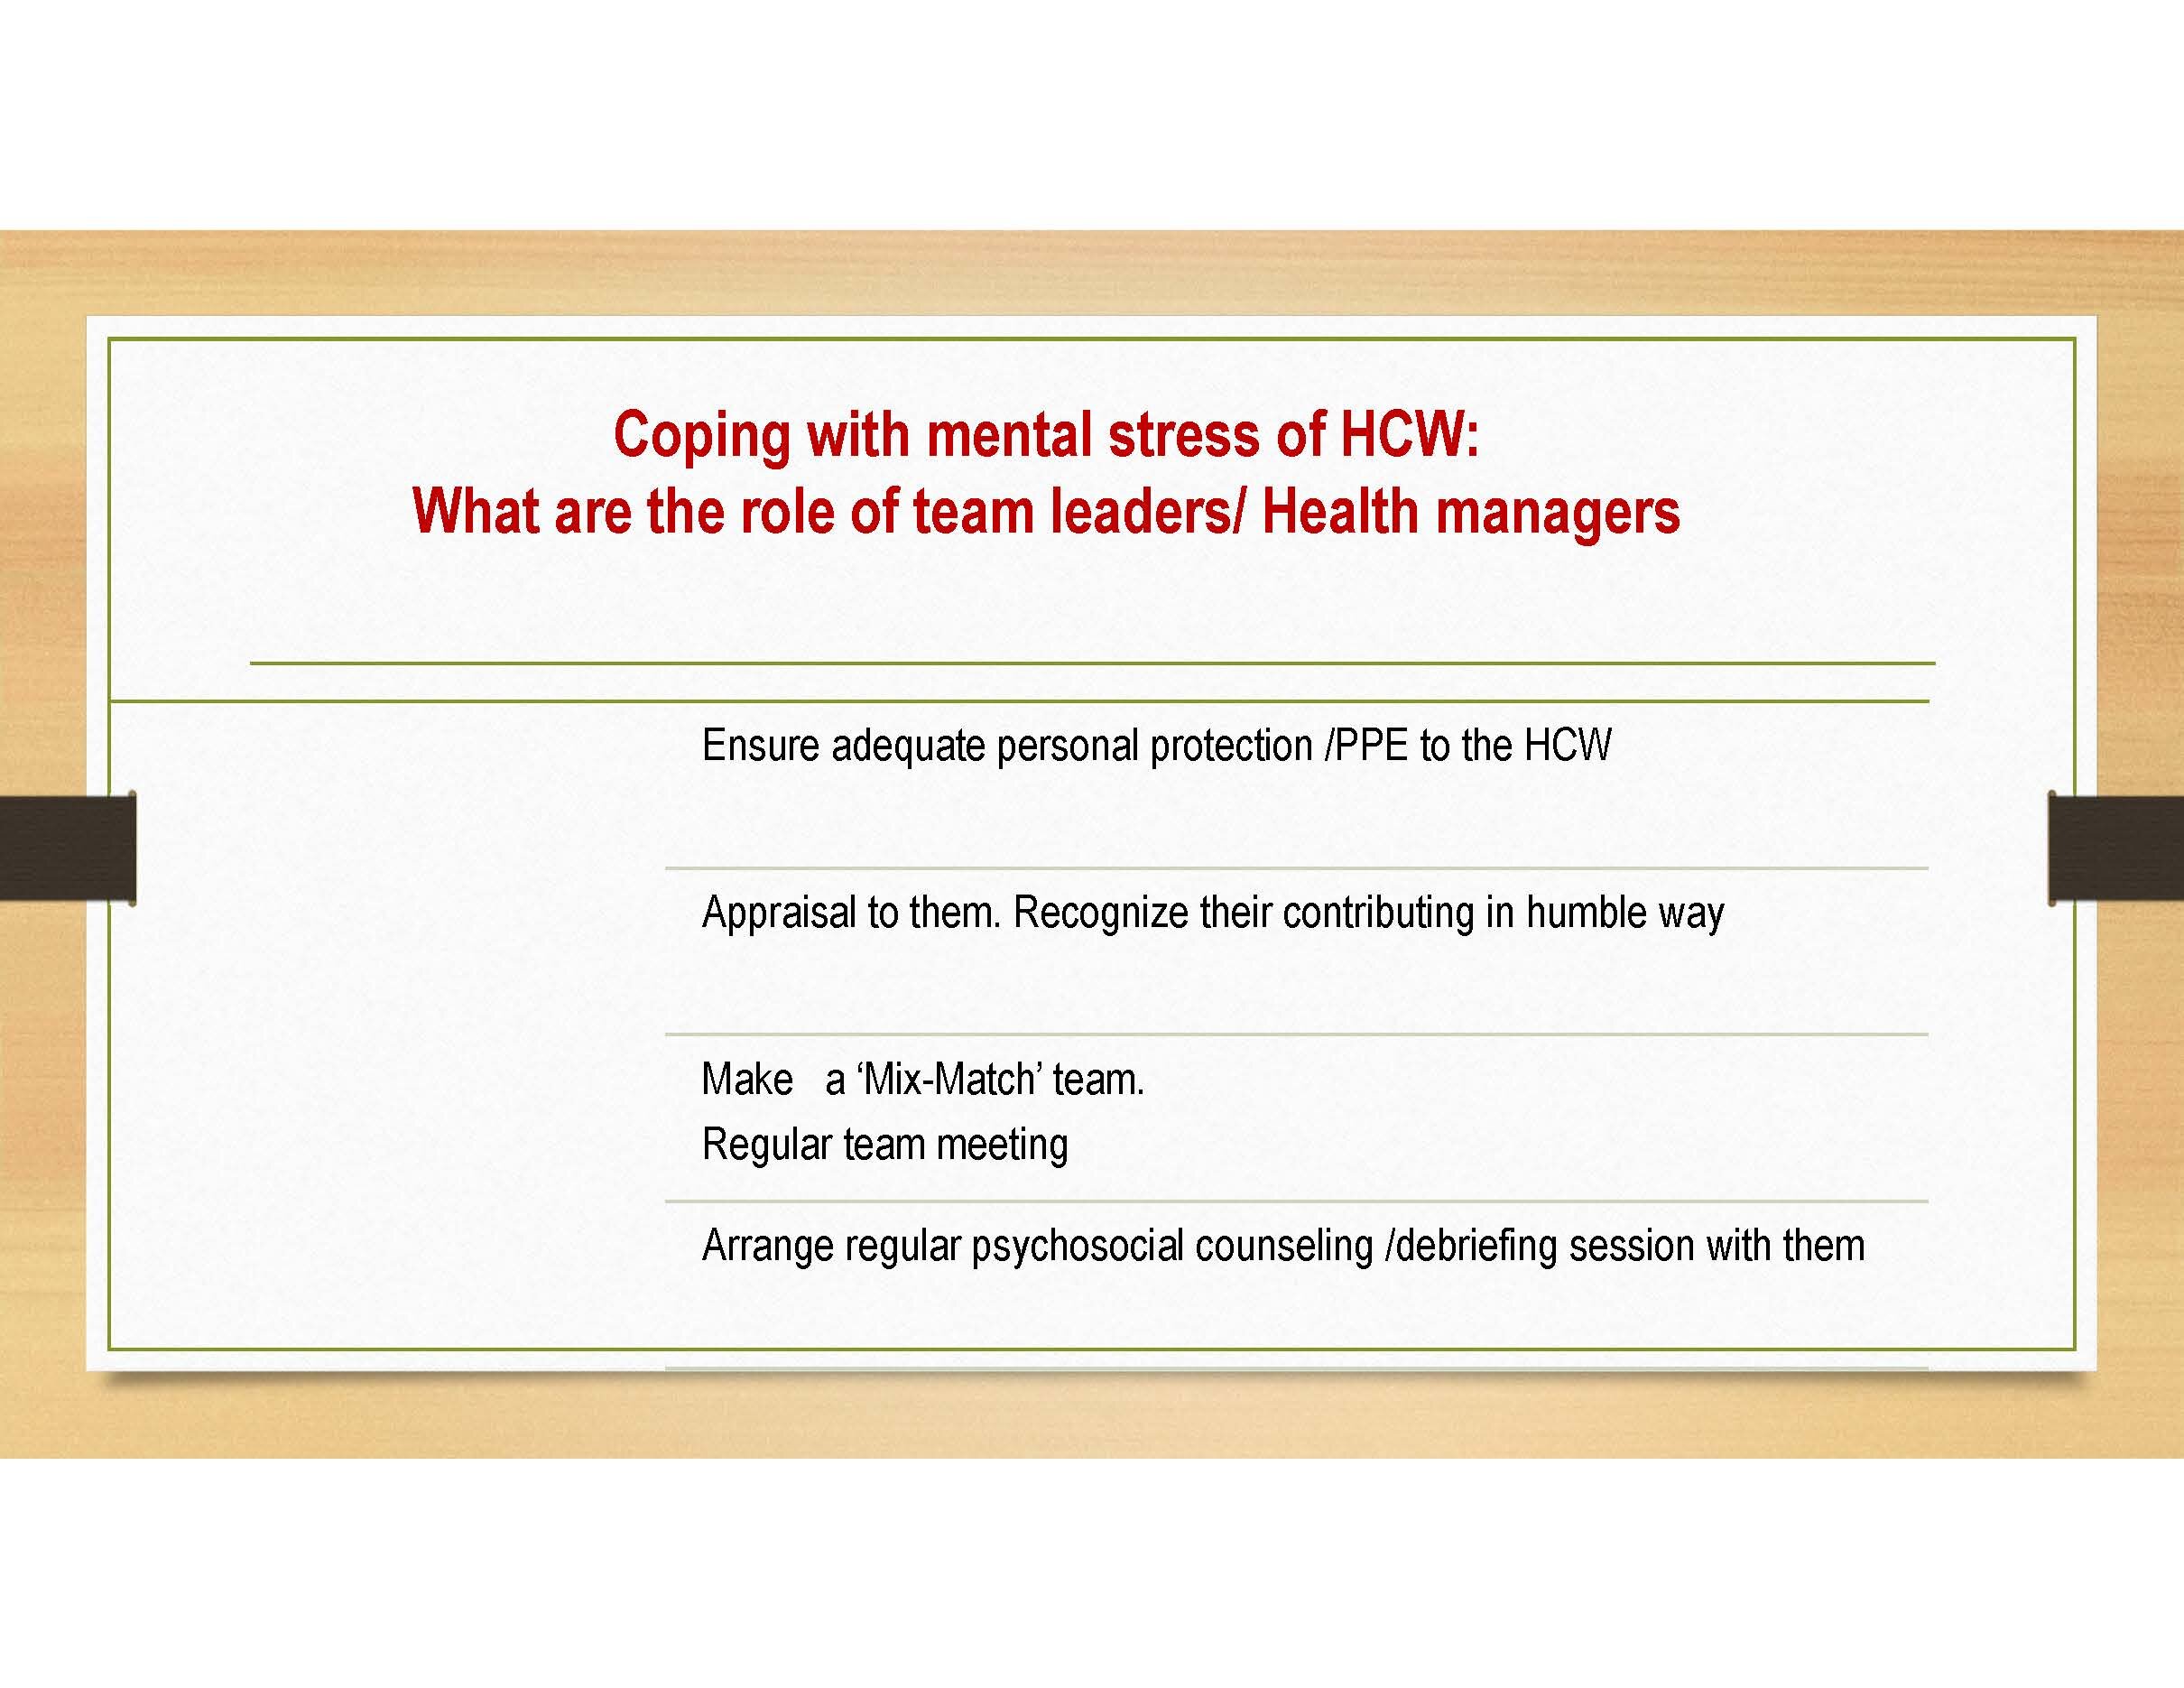 RTM_Session 1_Mental Health in COVID 19_Page_20.jpg